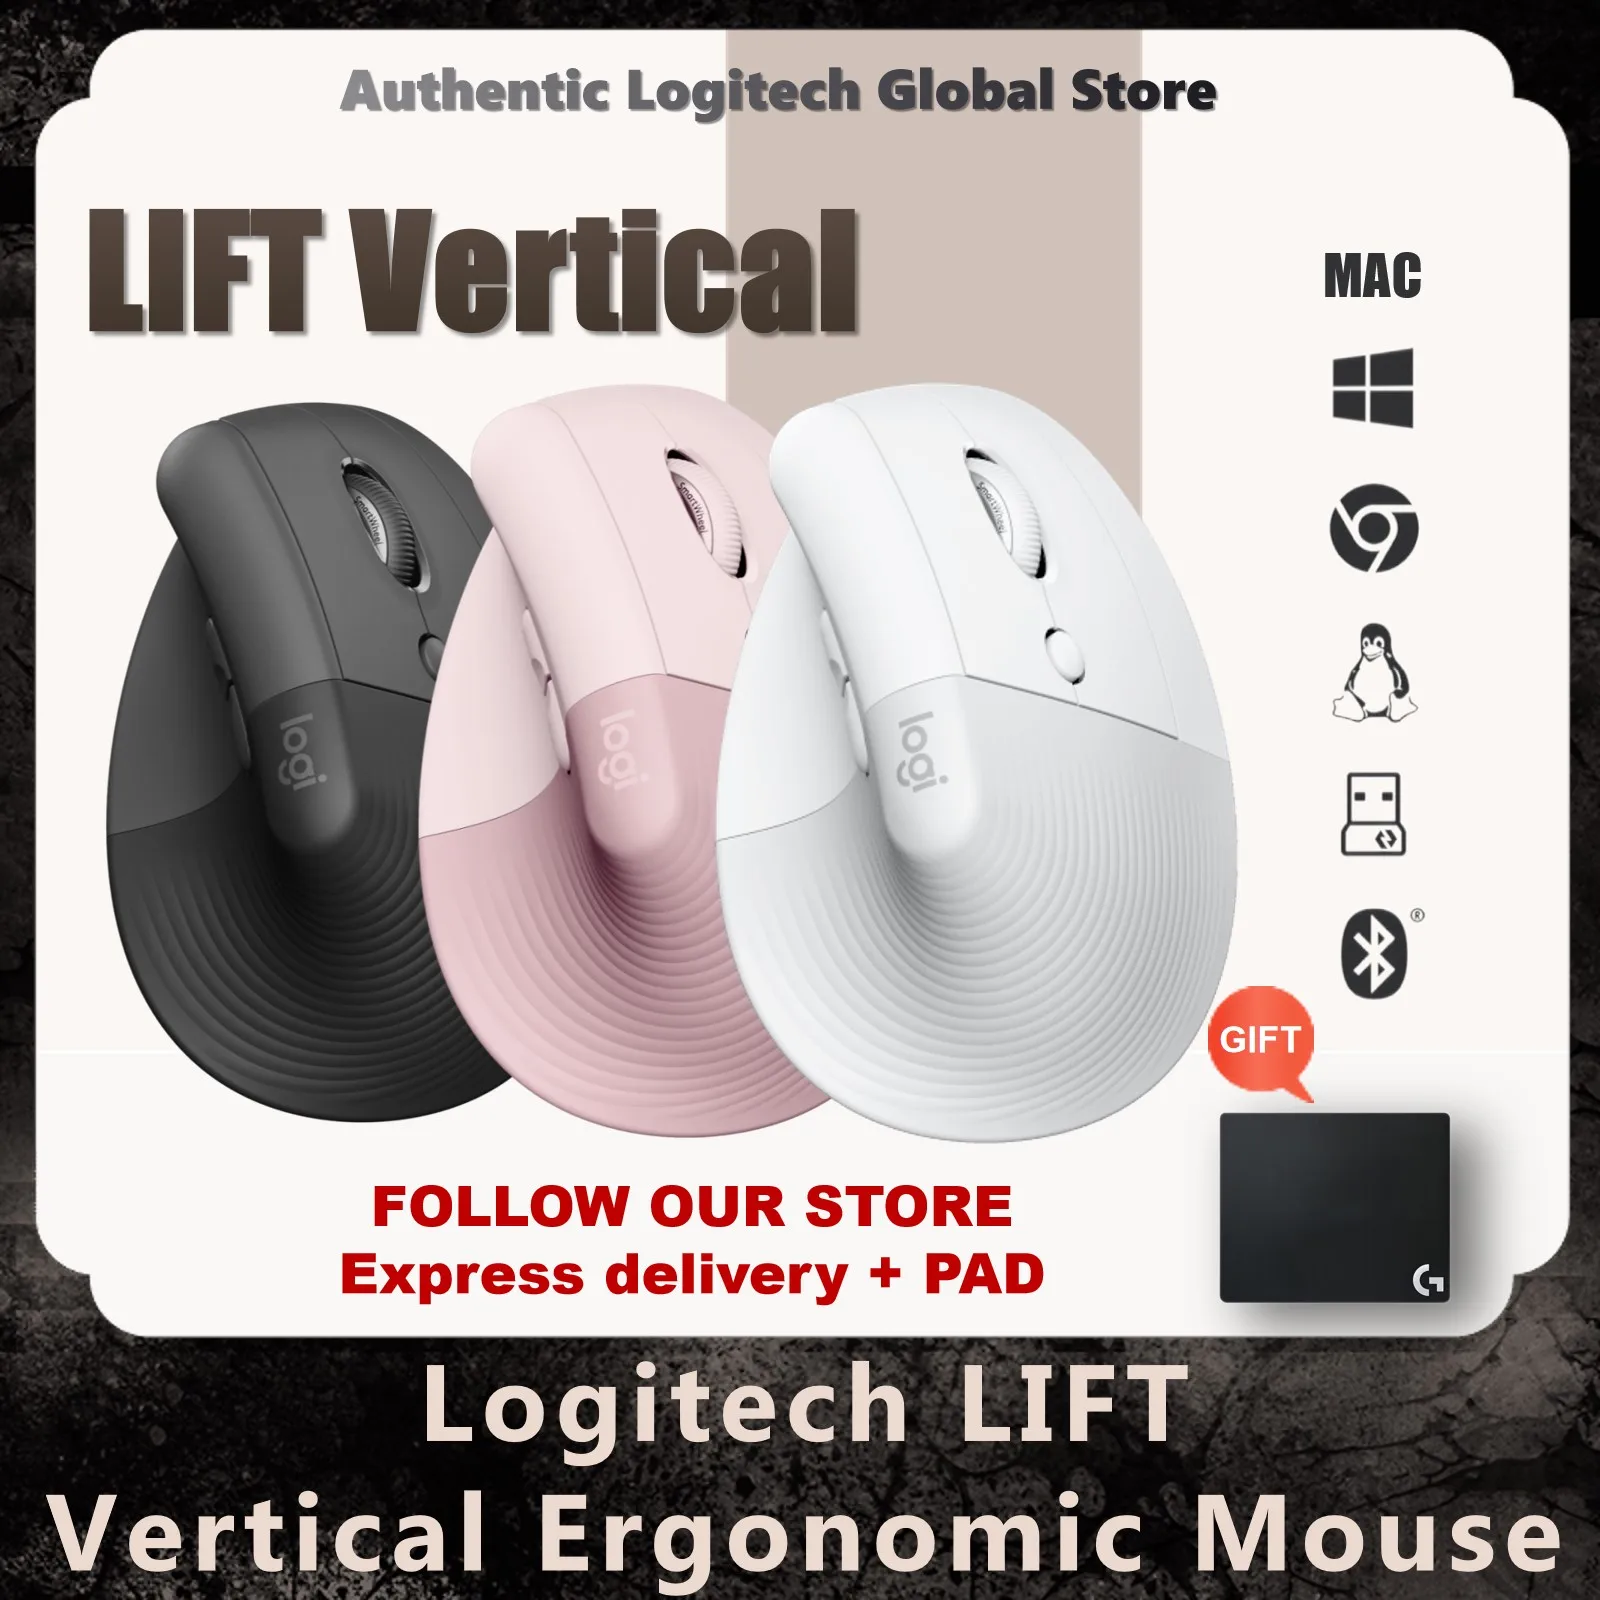 New Logitech Lift Vertical Ergonomic Mouse Wireless Bluetooth Gaming Mice 6  Buttons Office Mouse 4000DPI for Laptop/PC/Mac/iPad - AliExpress